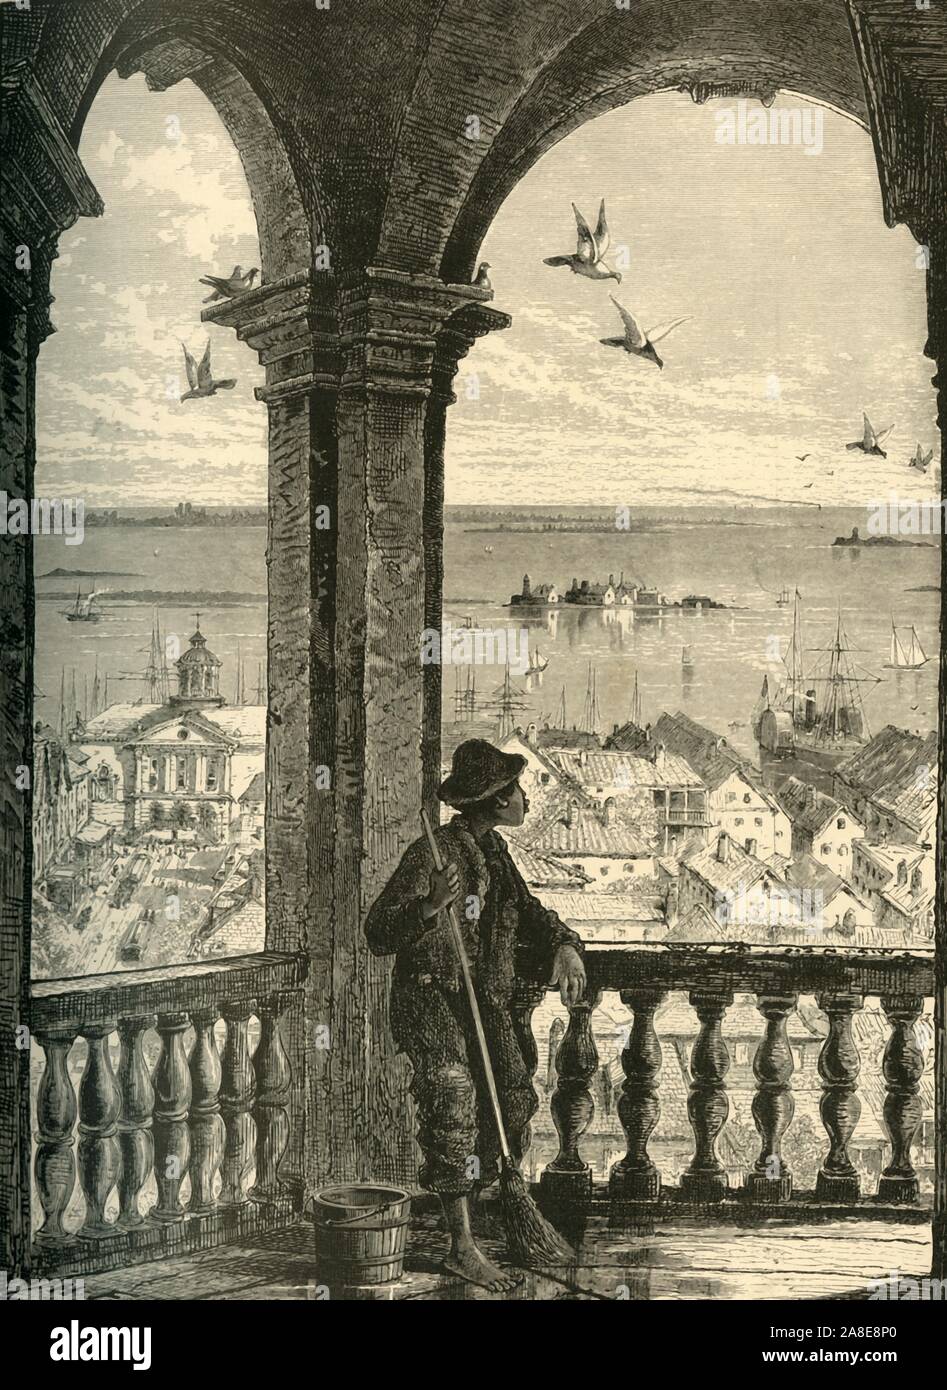 'A Glimpse of Charleston and Bay, from St. Michael's Church', 1872. View of the town of Charleston and the Atlantic Ocean, South Carolina, USA. The church of St Michael was erected in the 1750s. From &quot;Picturesque America; or, The Land We Live In, A Delineation by Pen and Pencil of the Mountains, Rivers, Lakes...with Illustrations on Steel and Wood by Eminent American Artists&quot; Vol. I, edited by William Cullen Bryant. [D. Appleton and Company, New York, 1872] Stock Photo